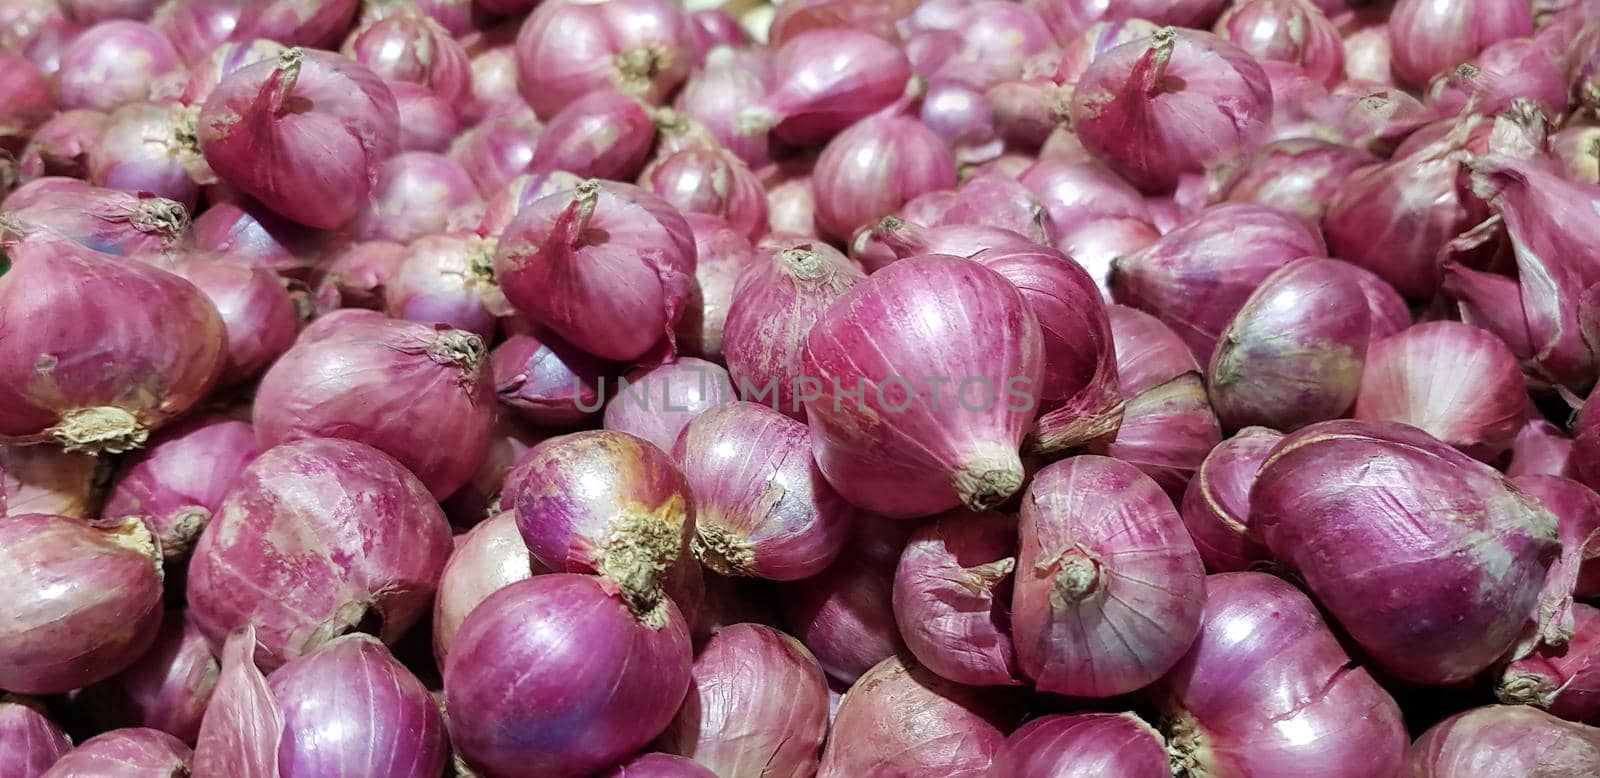 Group of Shallots onion Fresh purple shallots or Allium cepa, close up picture in the market